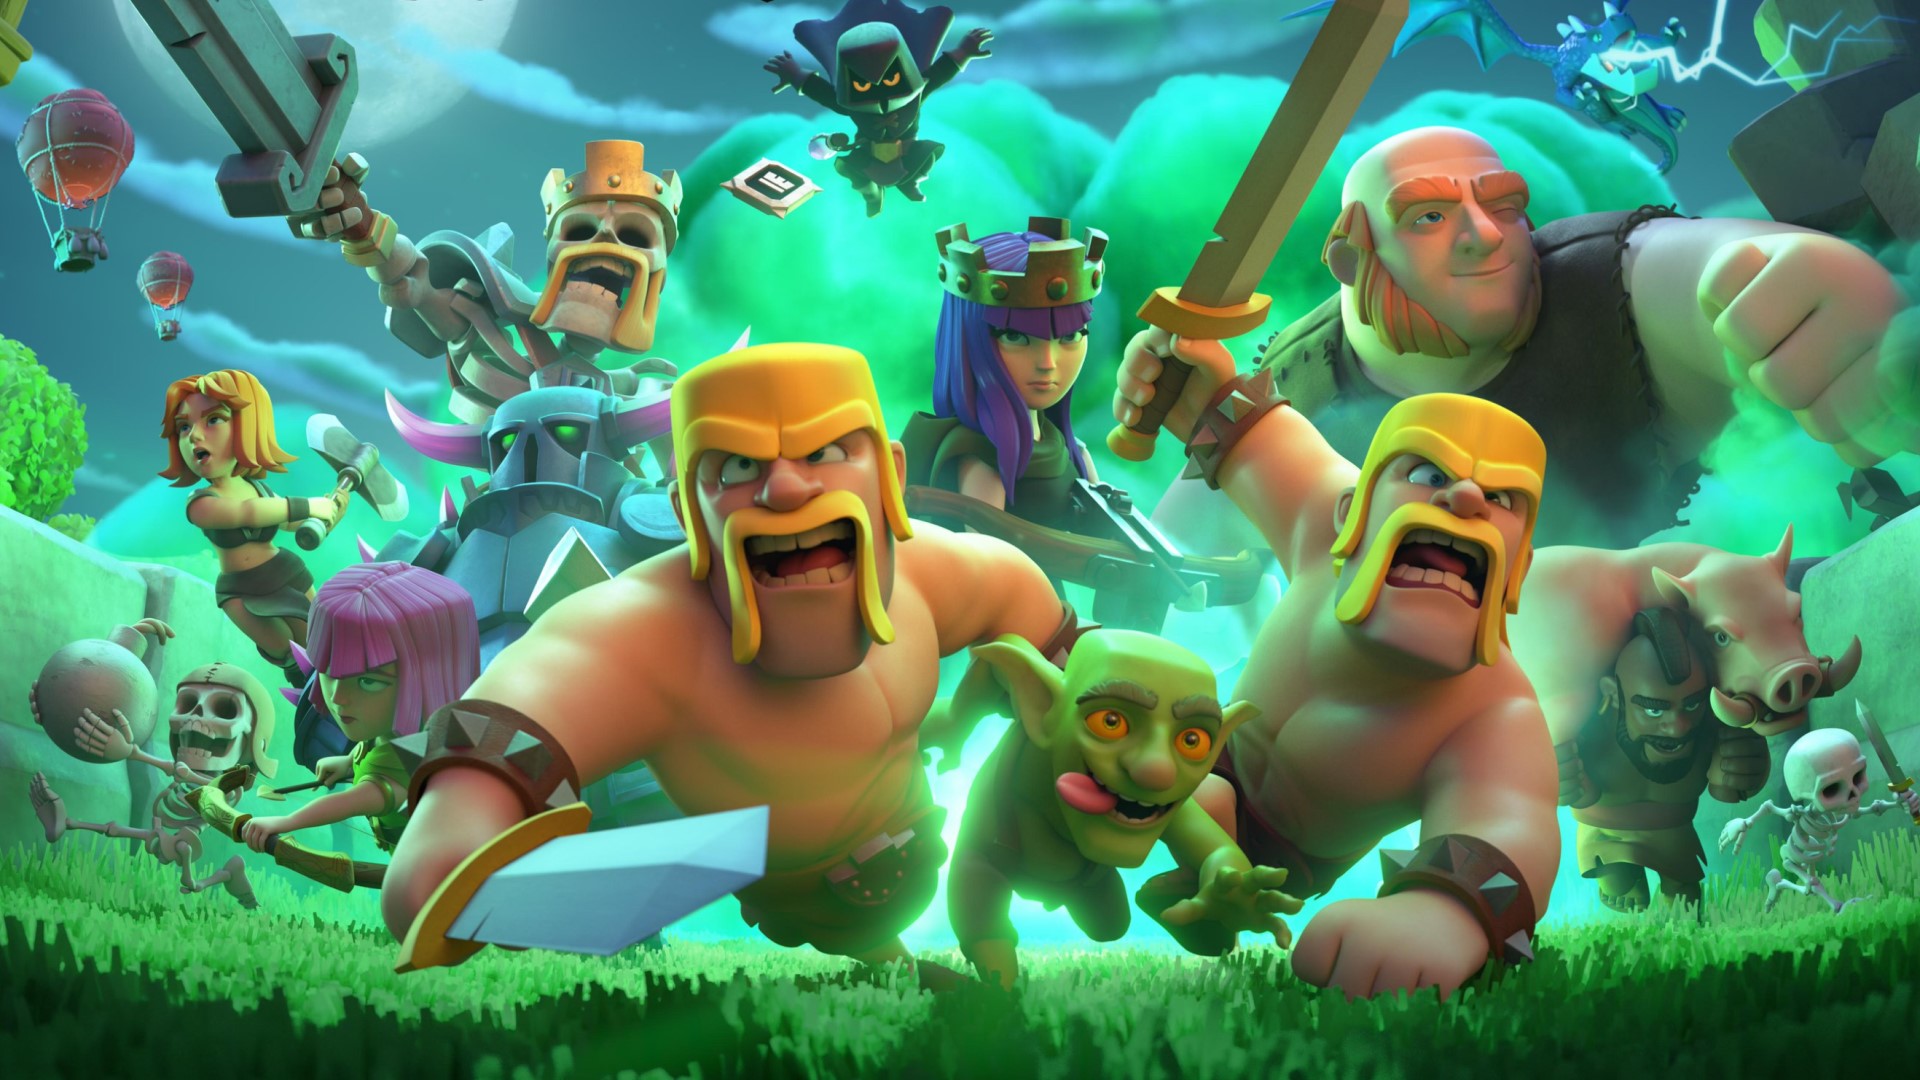 In key art from the mobile game Clash of Clans, several warriors, undead and living alike, emerge with weapons from am almost surreal turquoise cloud, ready for battle.